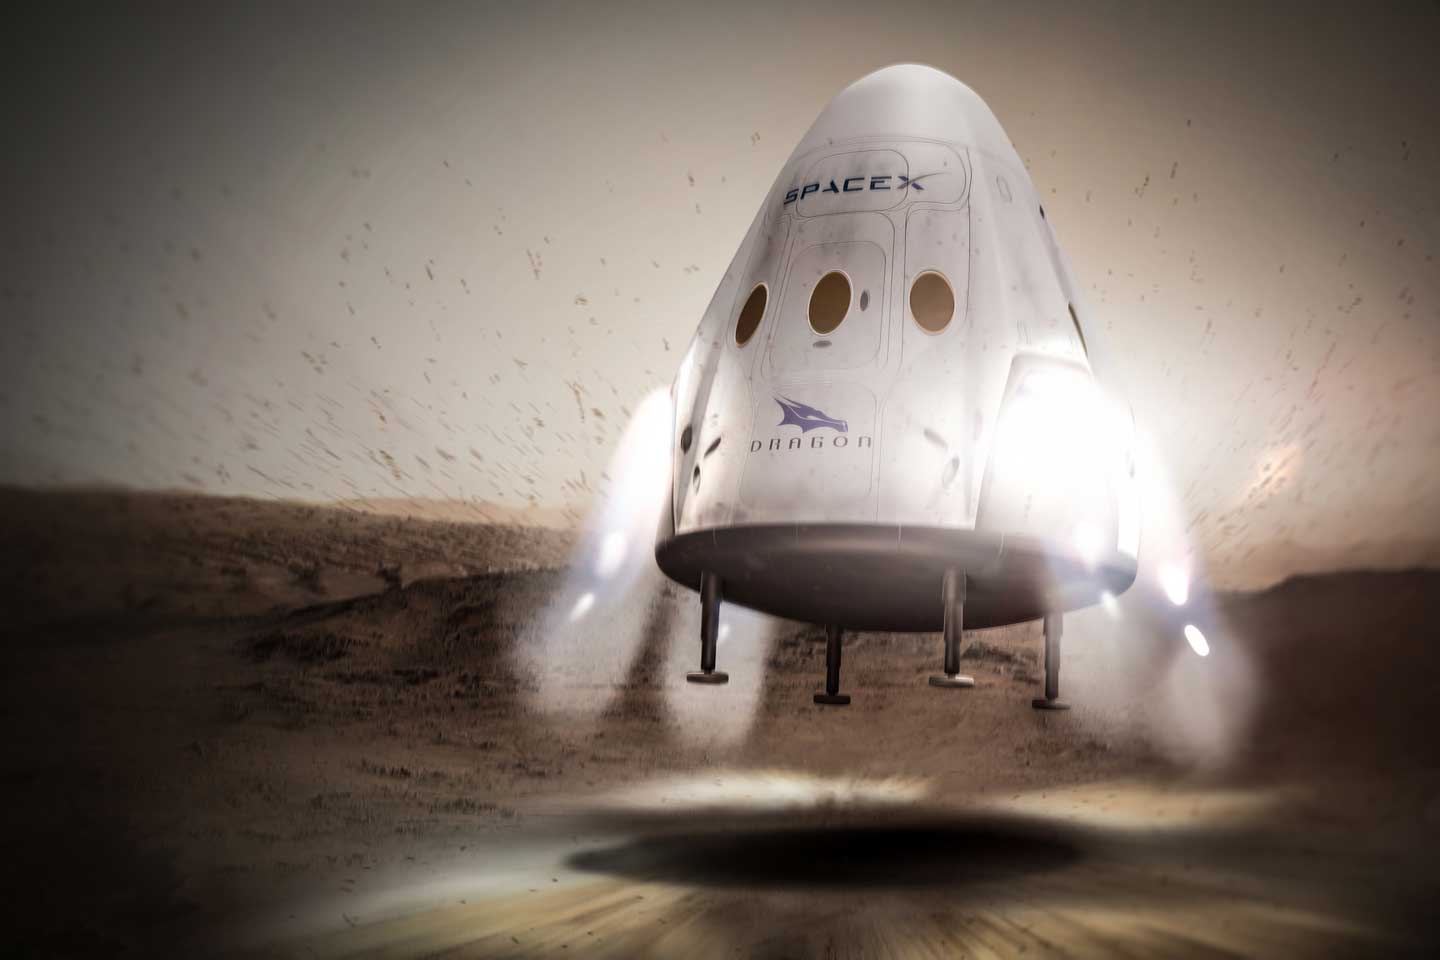 Concept art of Musk's original Red Dragon plan, using thrusters to land on Mars. (SpaceX)